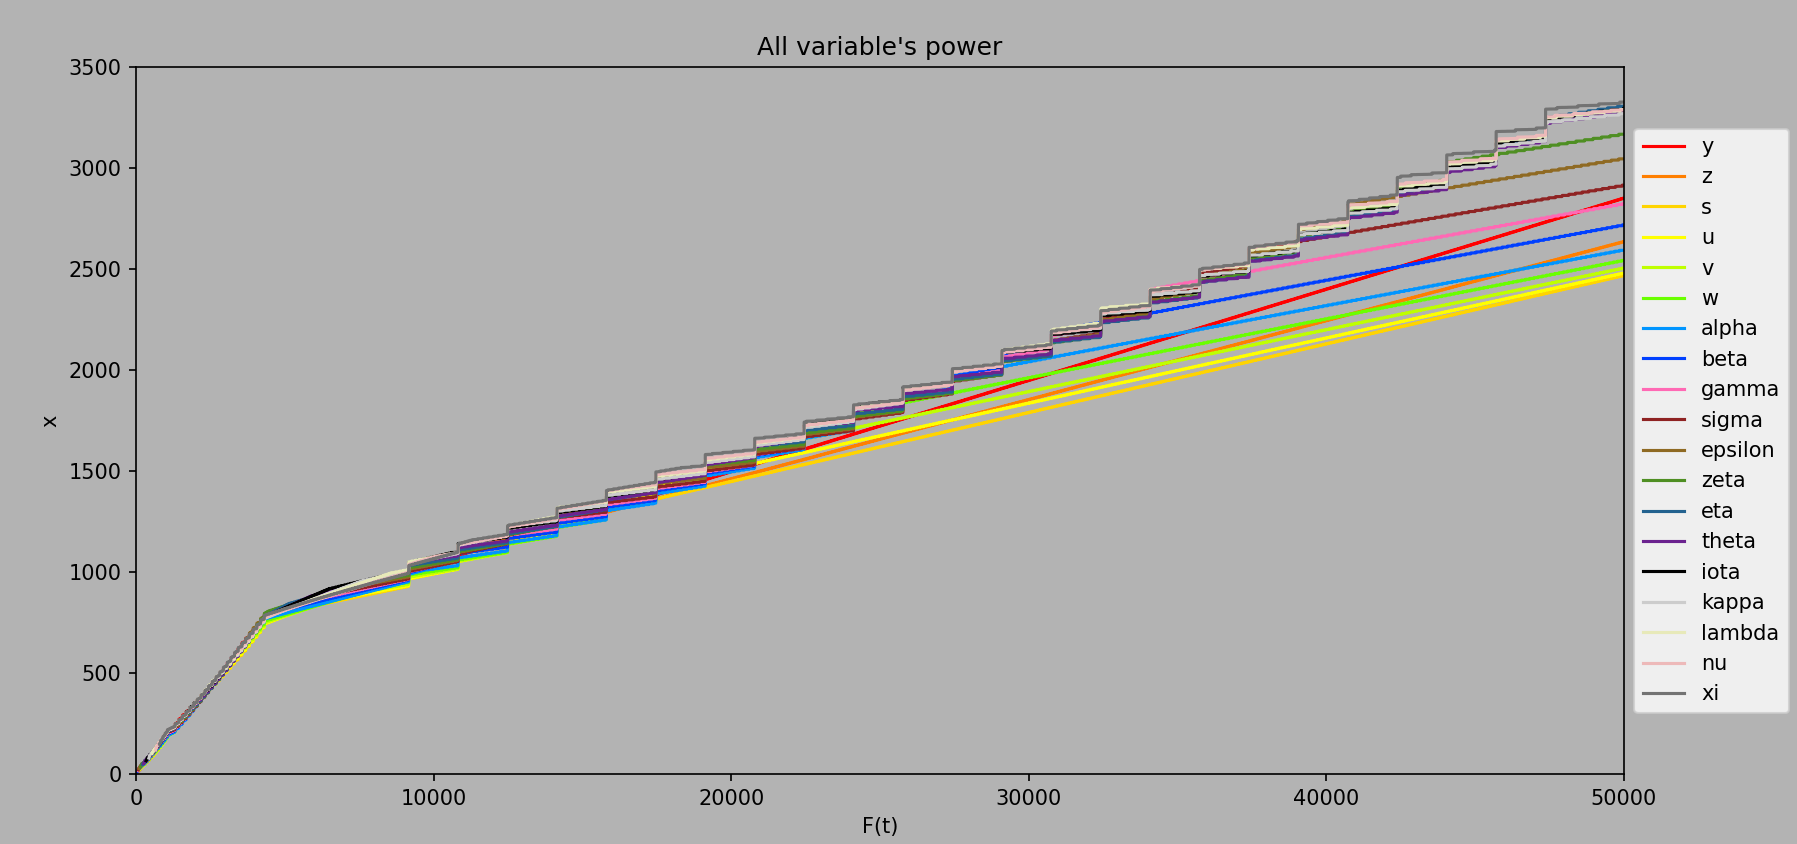 Variable Power up to ee50000